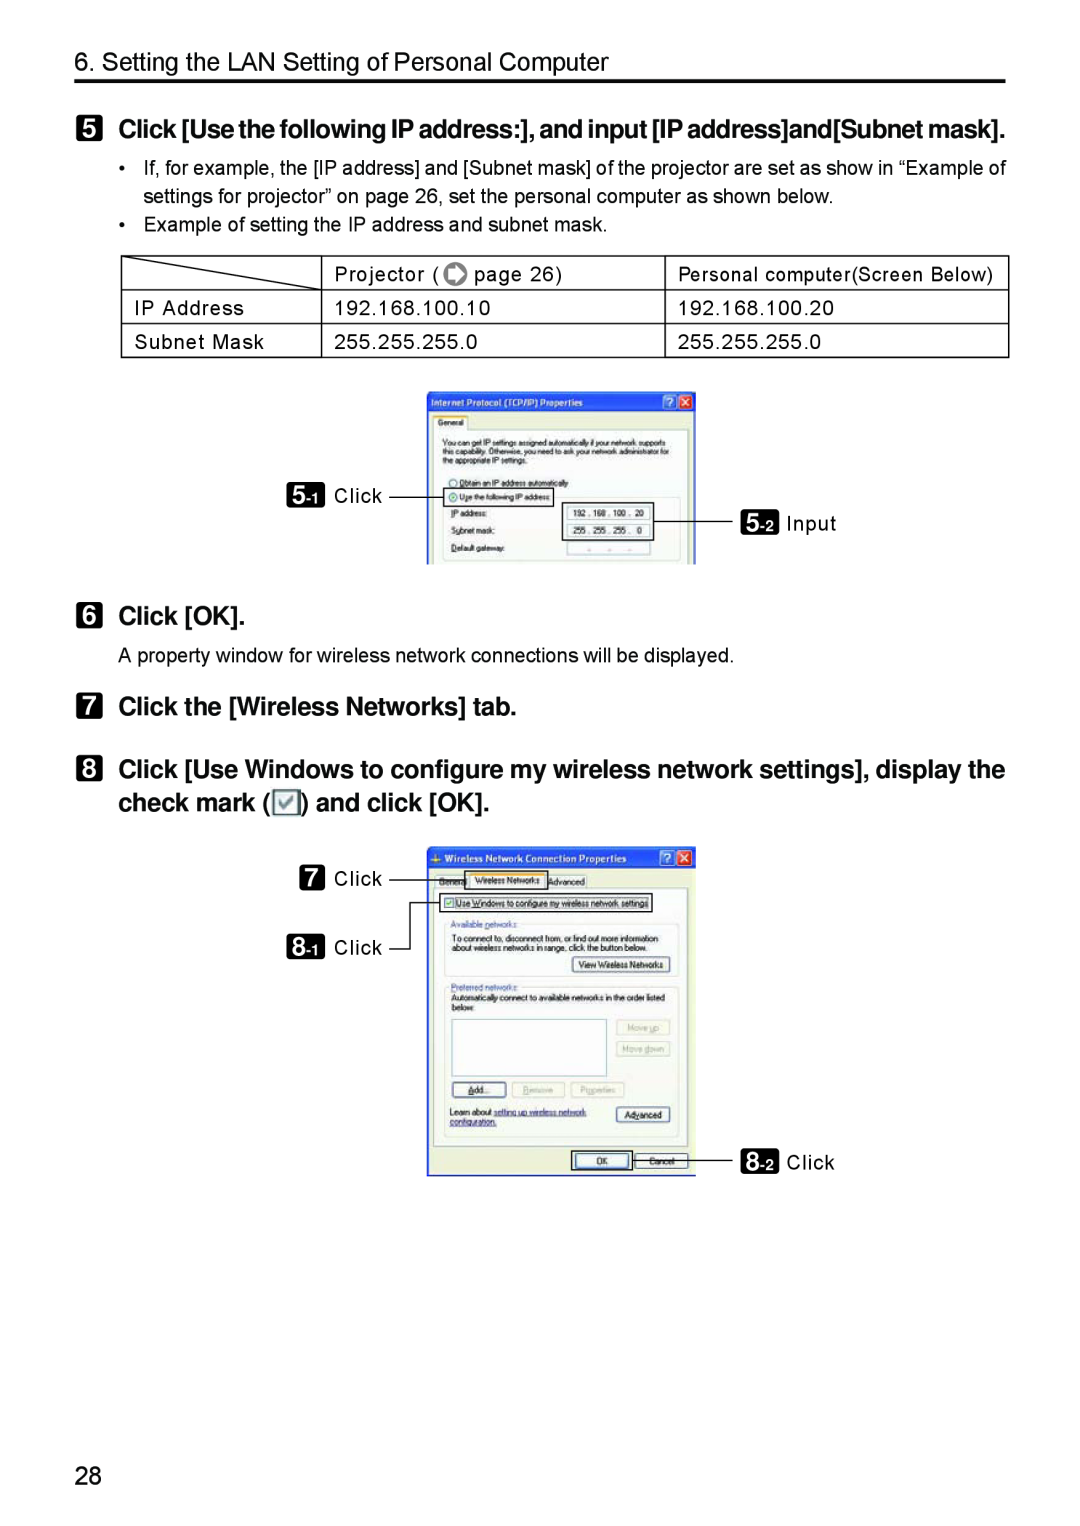 Dukane 8808 user manual Click OK, Click the Wireless Networks tab, Setting the LAN Setting of Personal Computer 